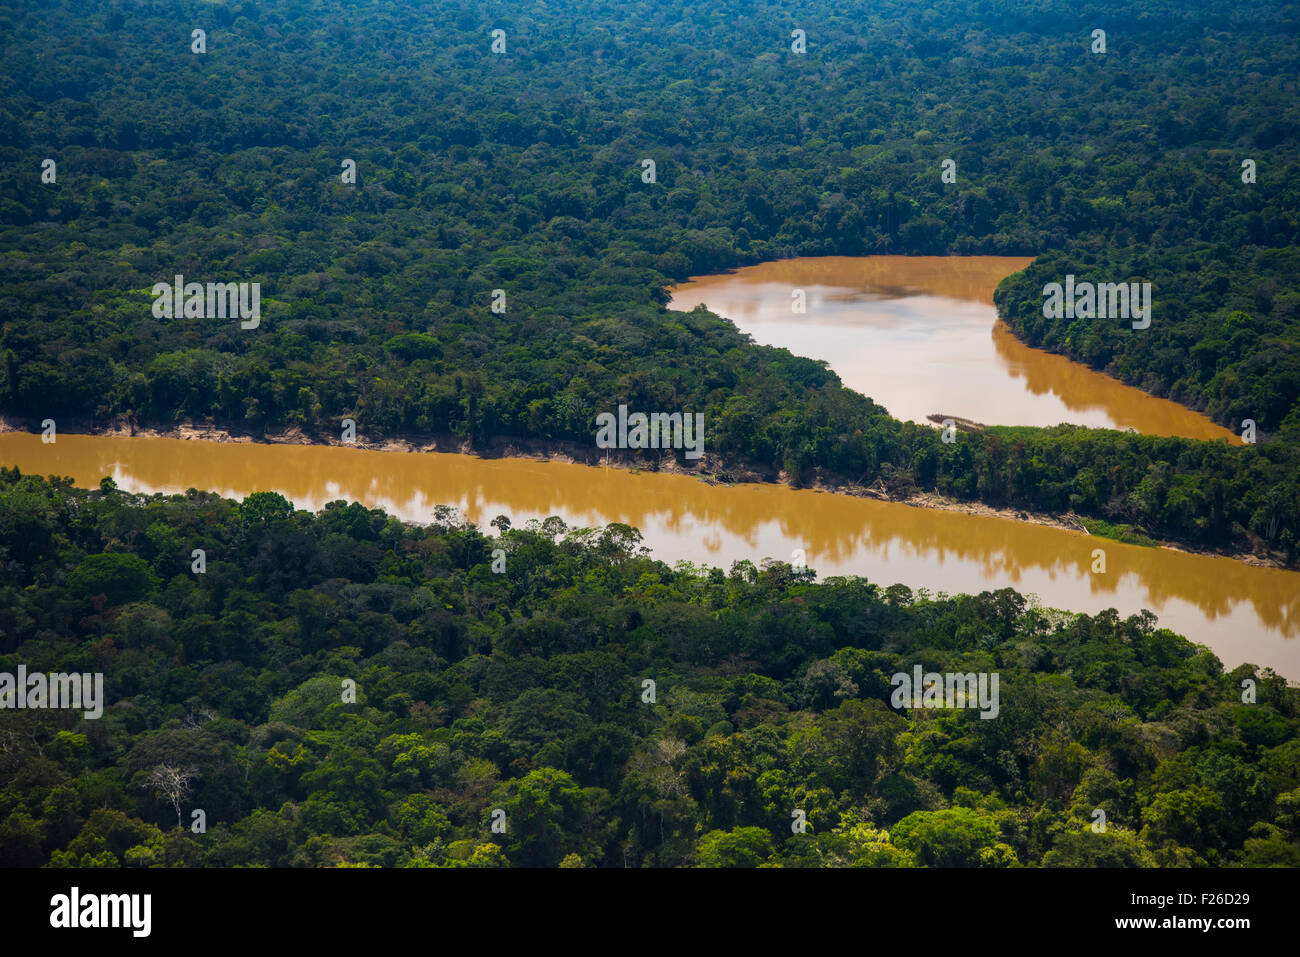 Rainforest aerial, Yavari River and primary forest, Amazon Region, Brazil in foreground, Peru on far bank Stock Photo